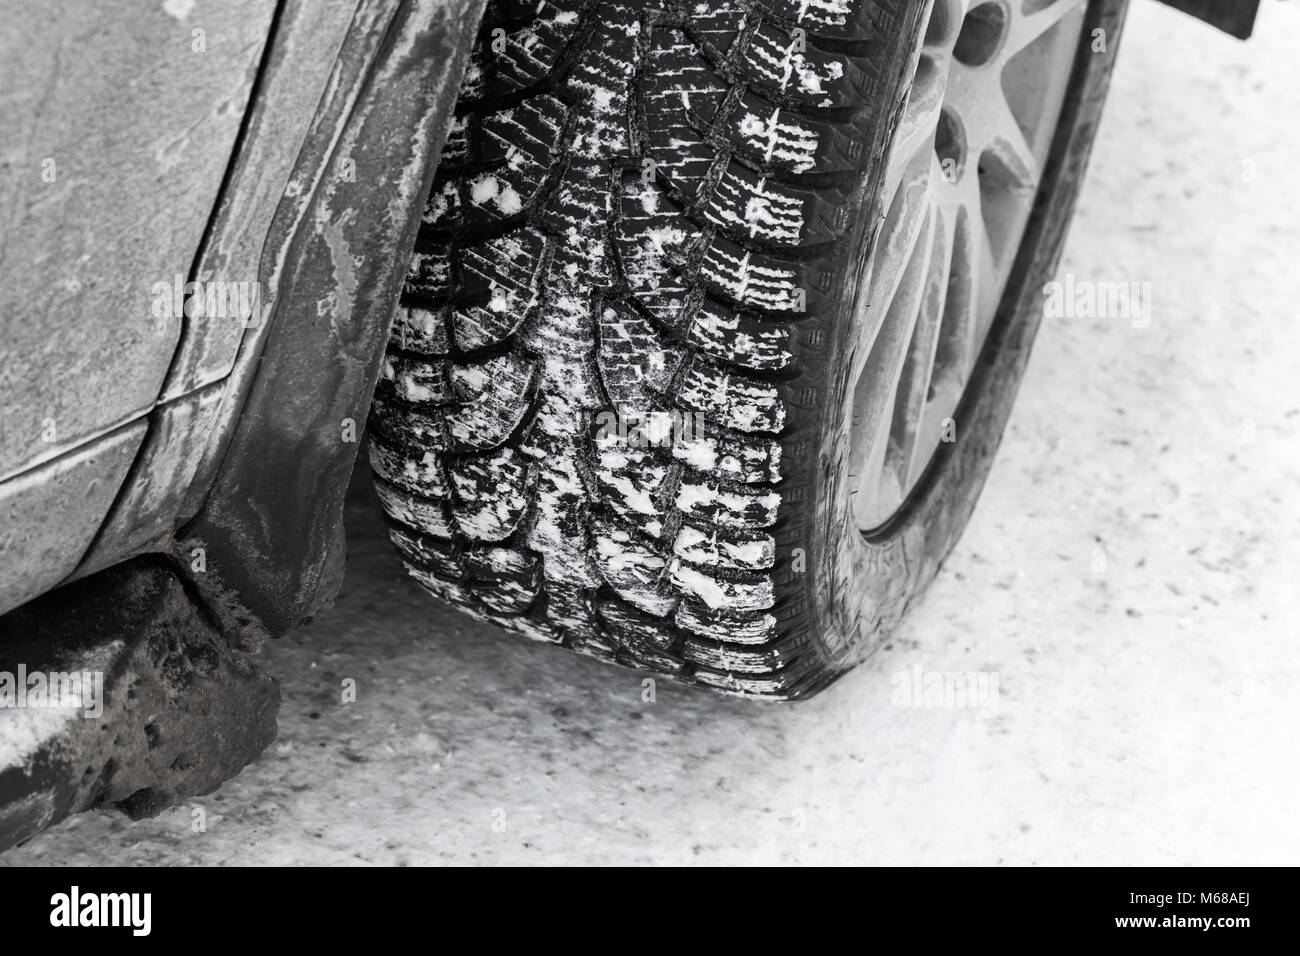 Car wheel on snow tire with metal studs, which improve traction on icy surfaces in winter season Stock Photo